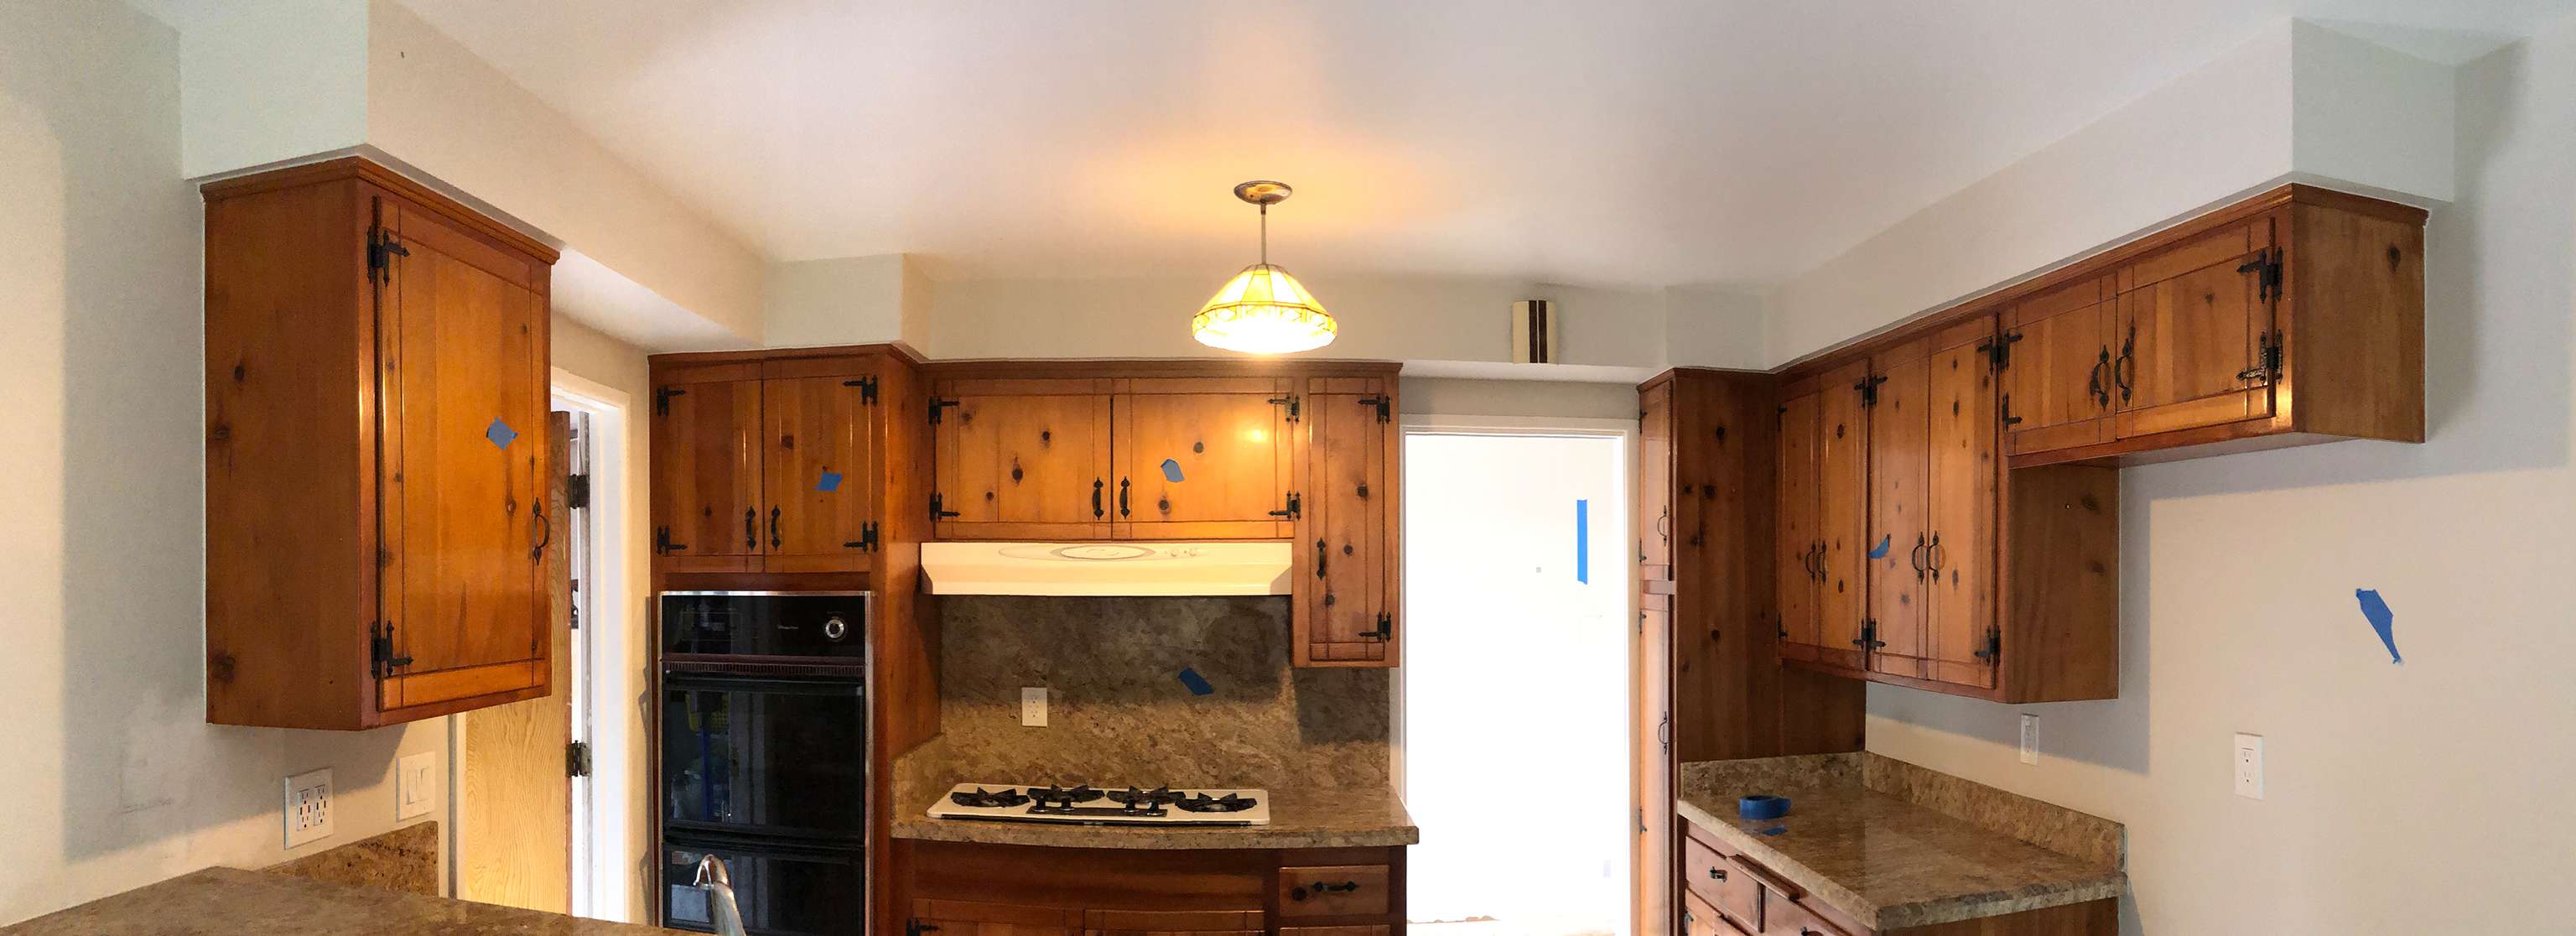 before-new-kitchen-remodel